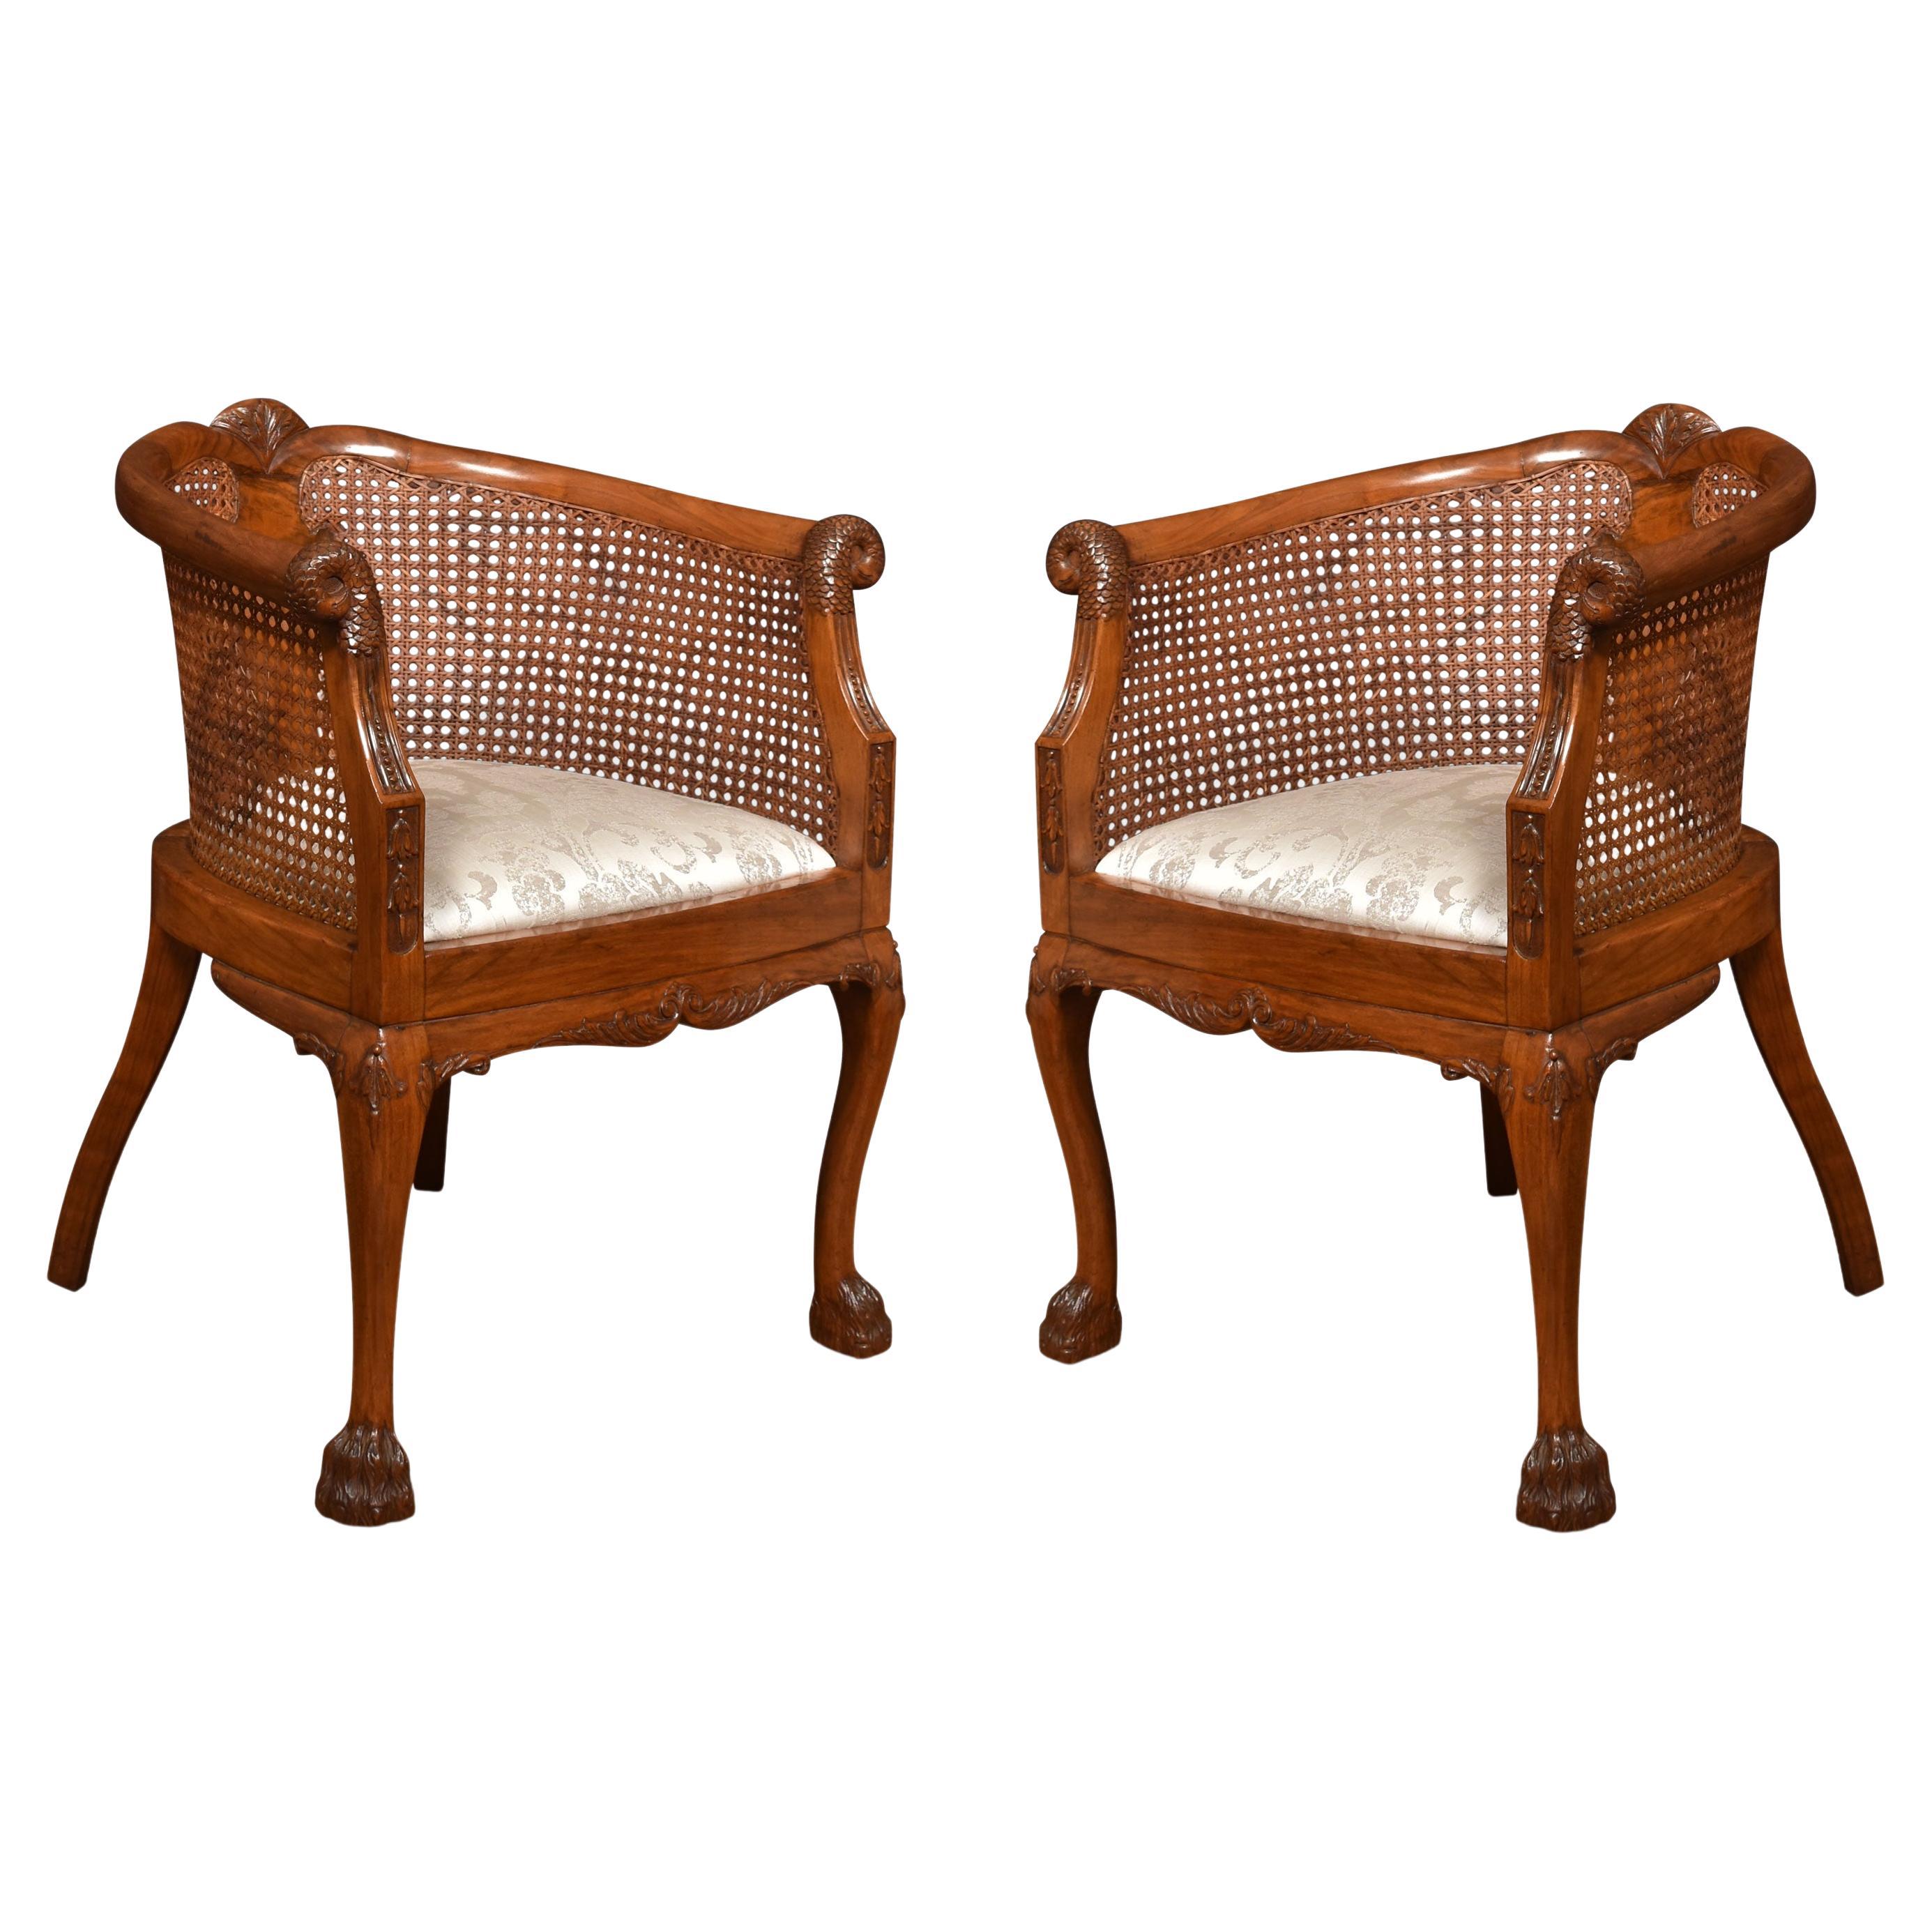 Pair of Walnut bergere arm chairs